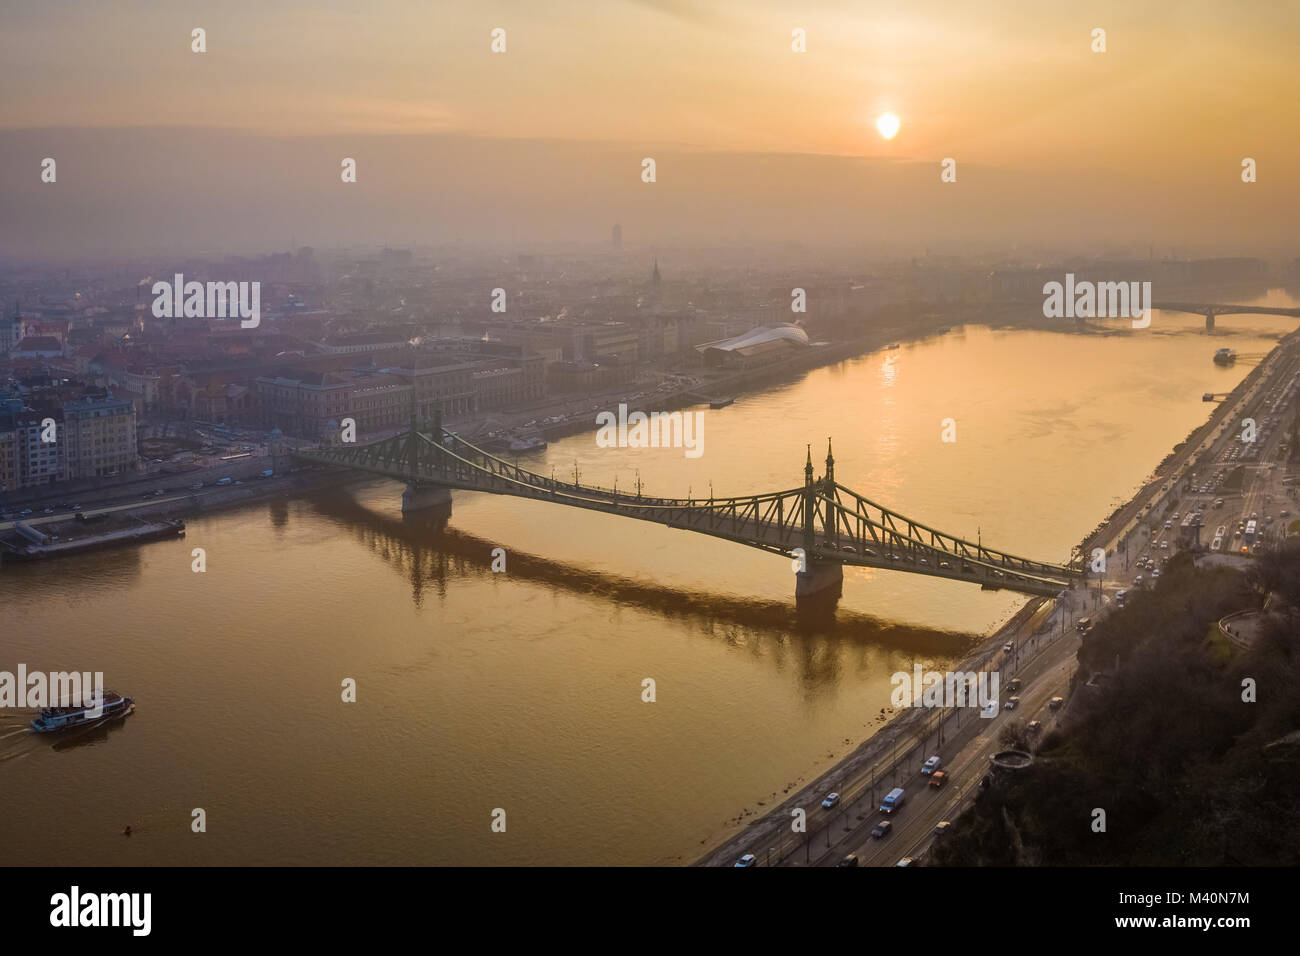 Budapest, Hungary - Aerial view of Liberty Bridge (Szabadsag Hid) over River Danube at sunrise on a beautiful winter morning Stock Photo